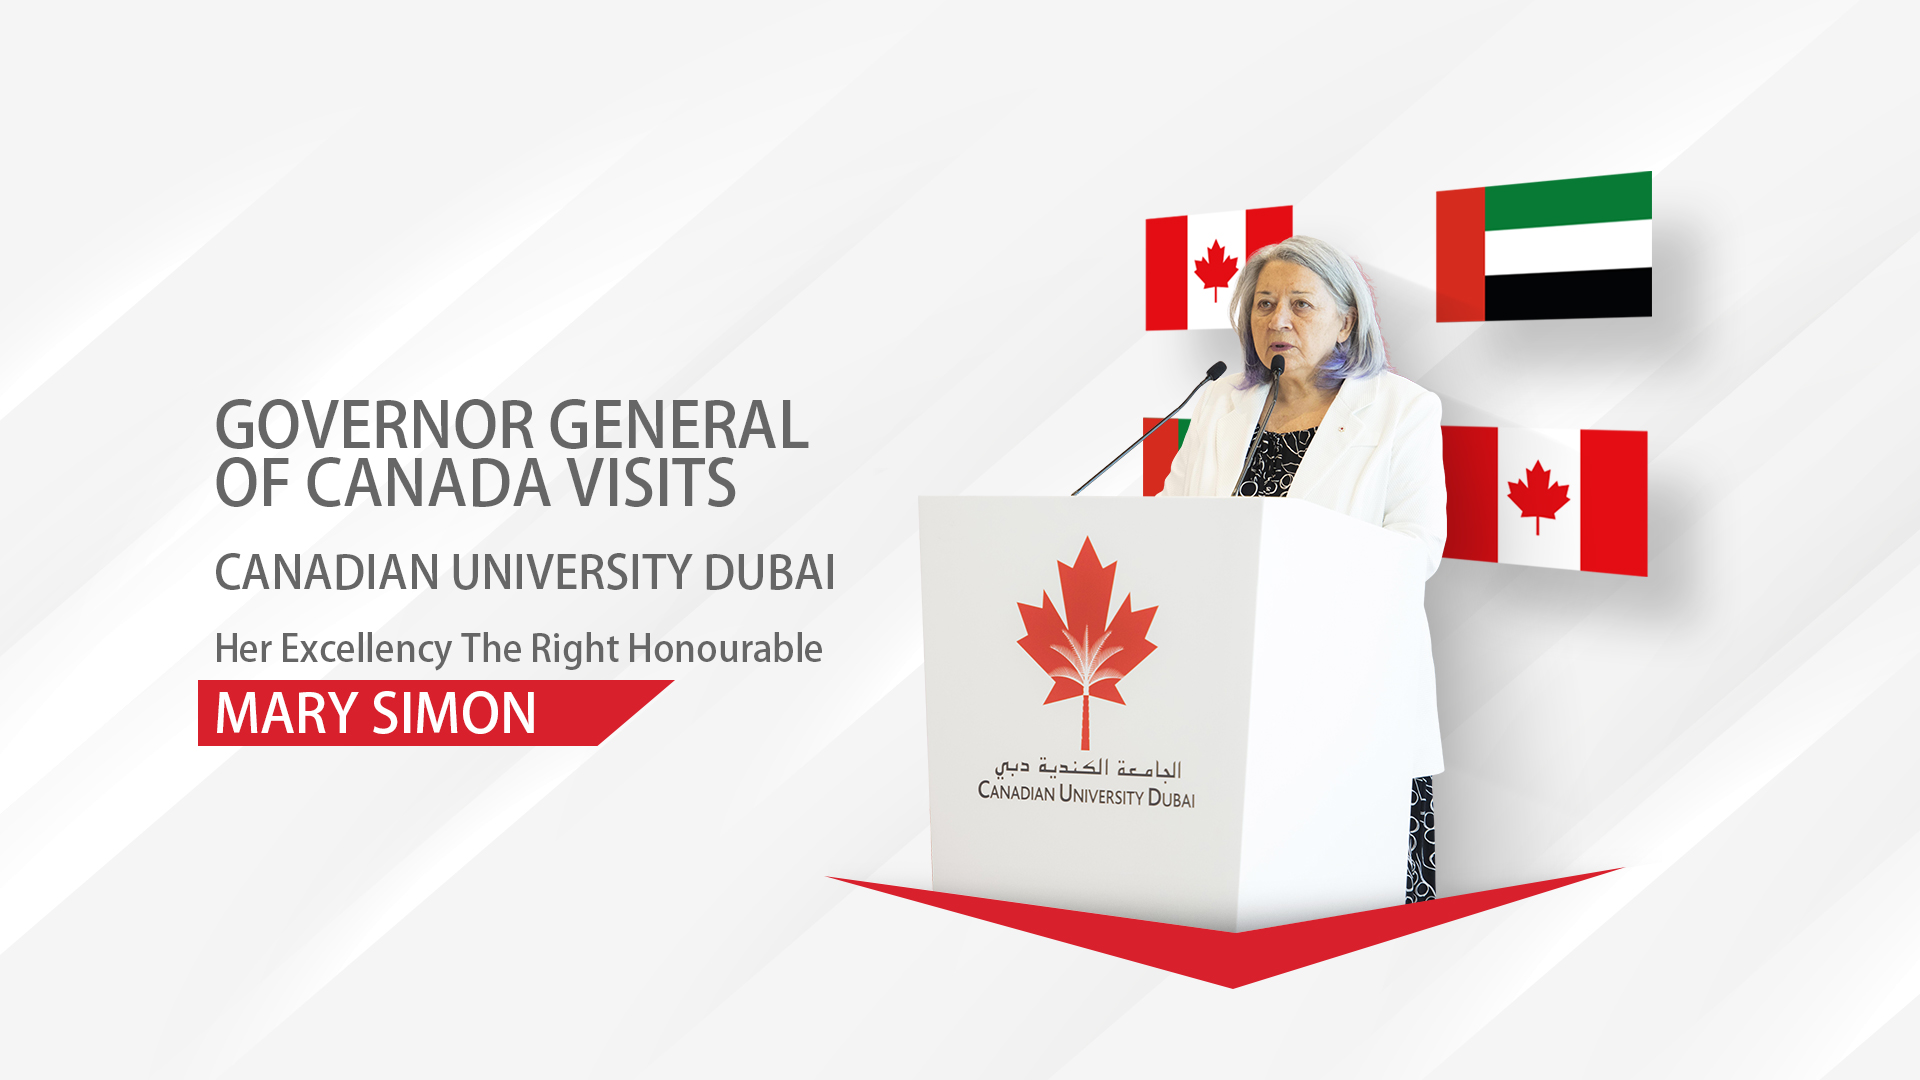 Governor General of Canada’s visit to CUD - Her Excellency The Right Honourable Mary Simon